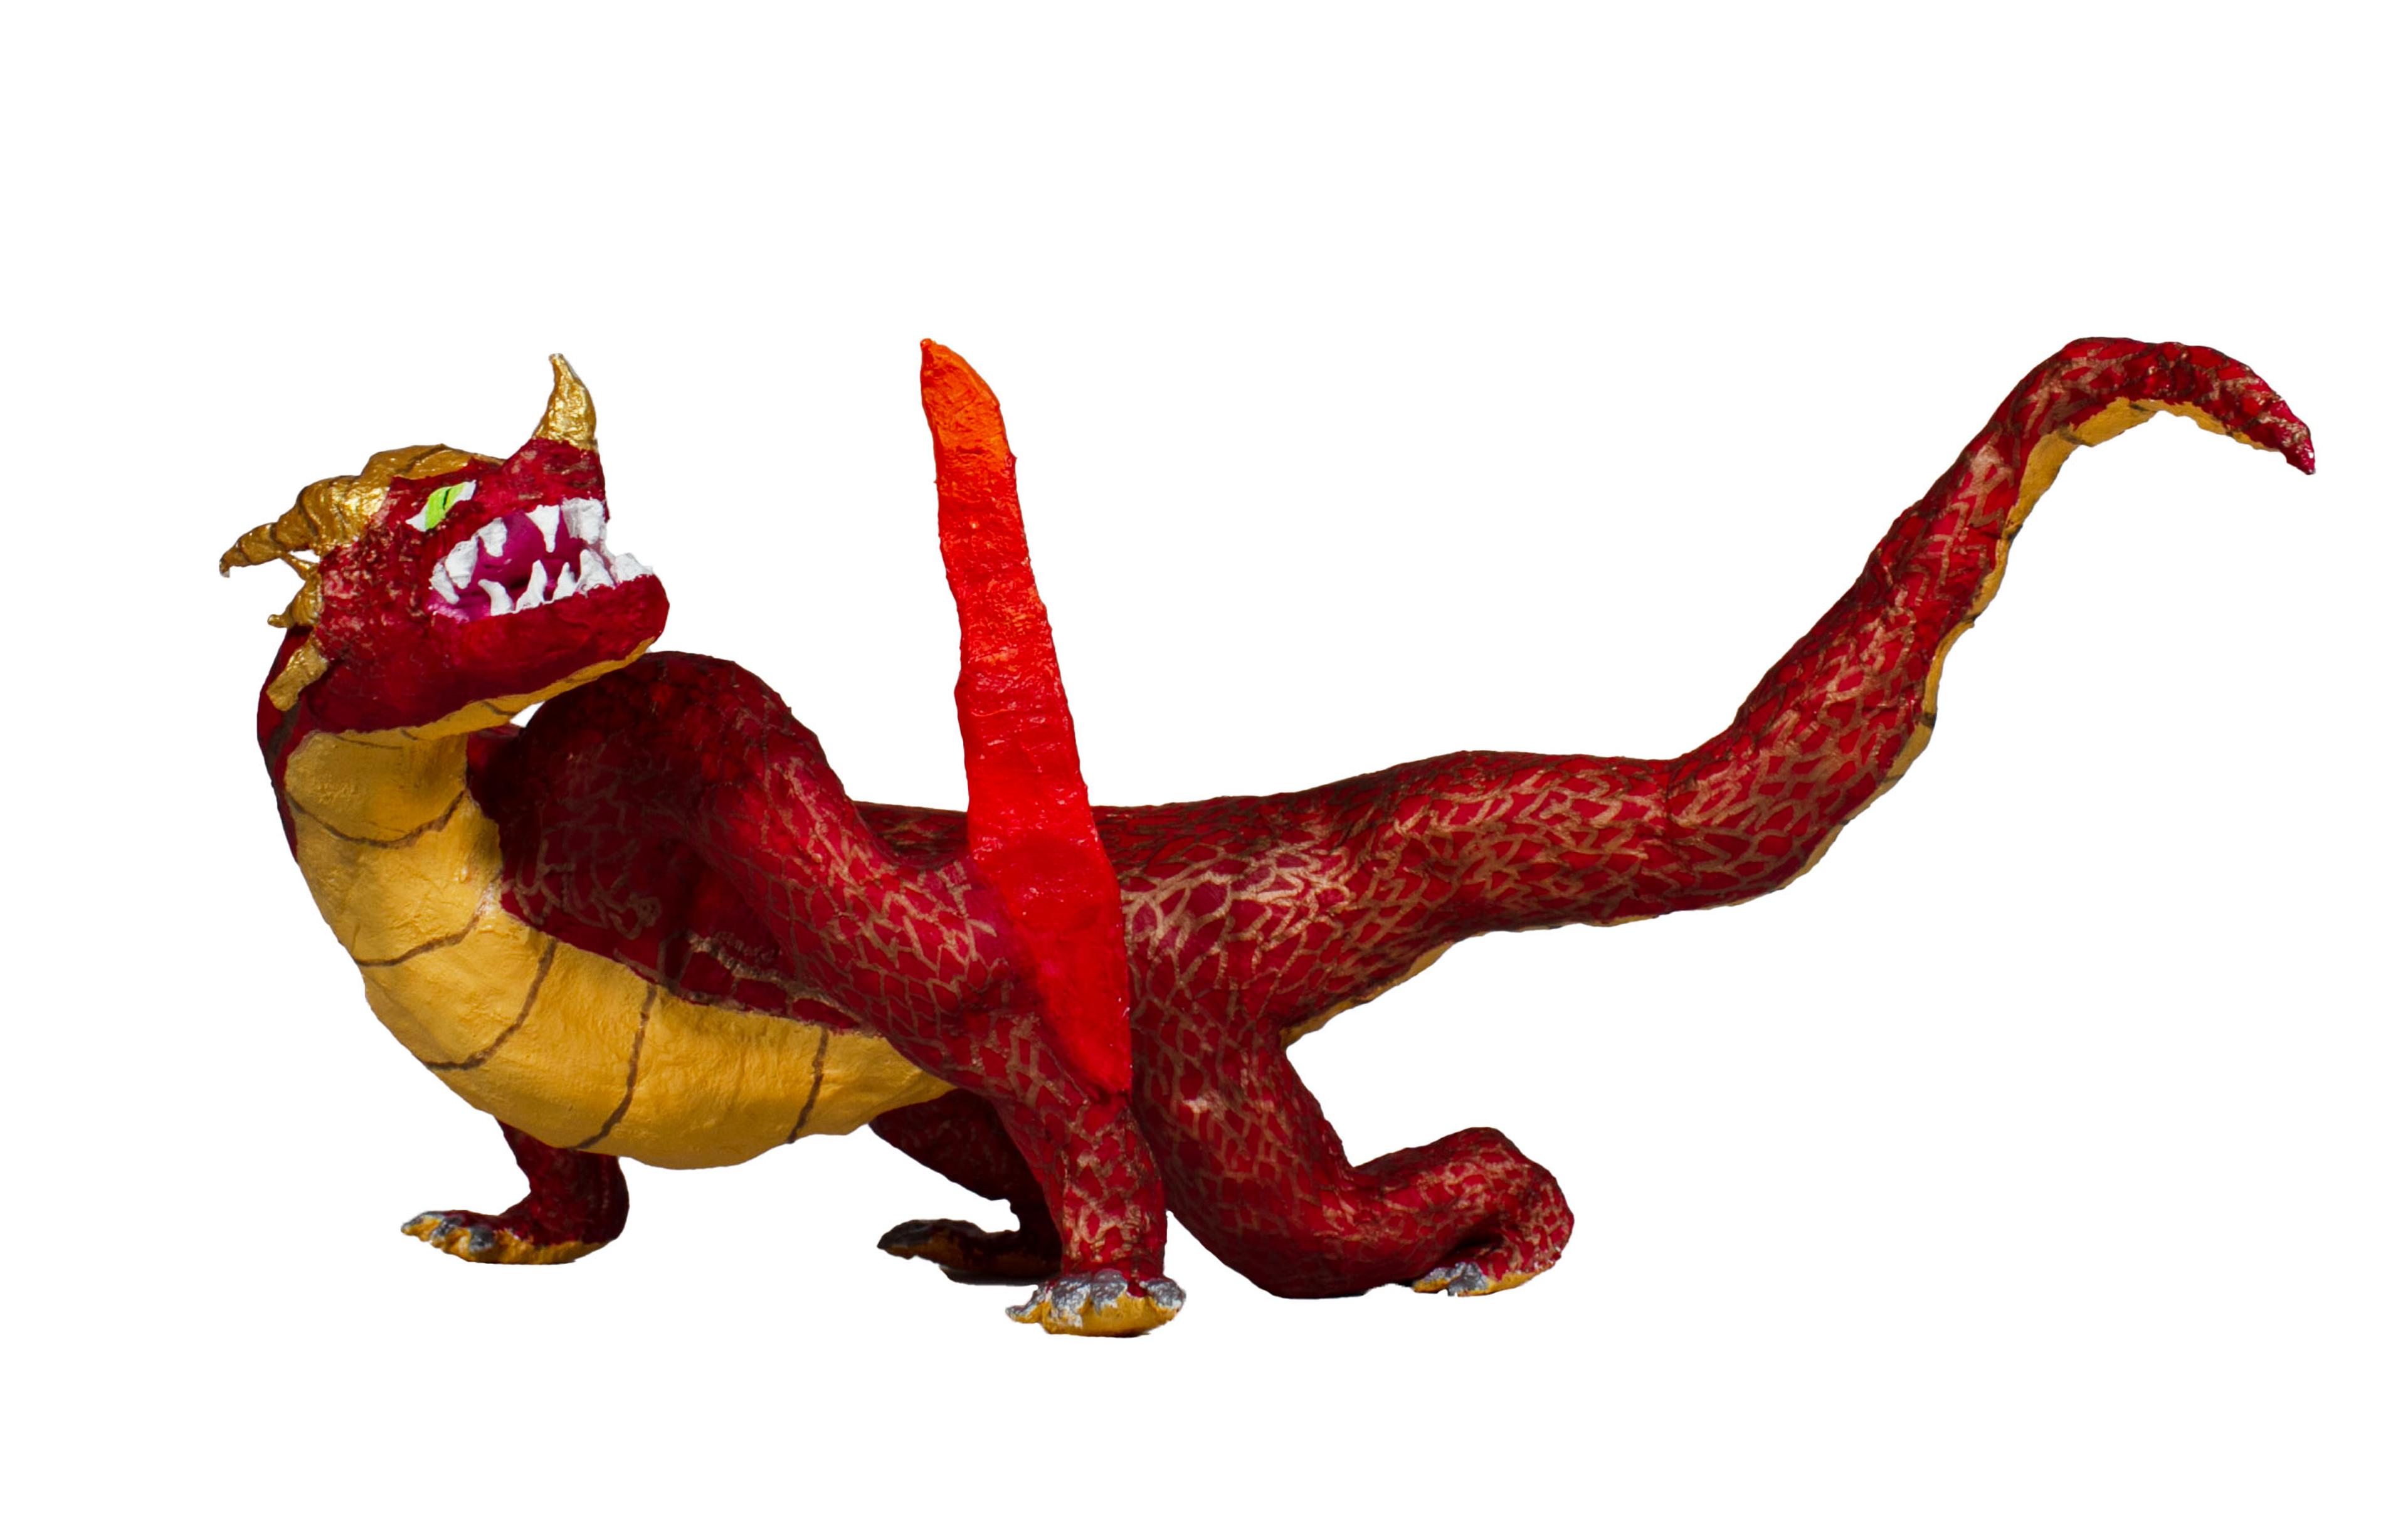 Sculpture of a red dragon made with plaster wrap, newspaper, and tape. The dragon is crouched on all fours, facing left, with its head turned back over its left shoulder, gazing upward and to the right. The dragon's underbelly is yellow with thin red stripes. The dragon's tail is long and tilts upward to the right. The dragon has golden yellow horns on its head and snout, and sharp white teeth in its open mouth. One of the dragon's wings hangs over its front left leg.